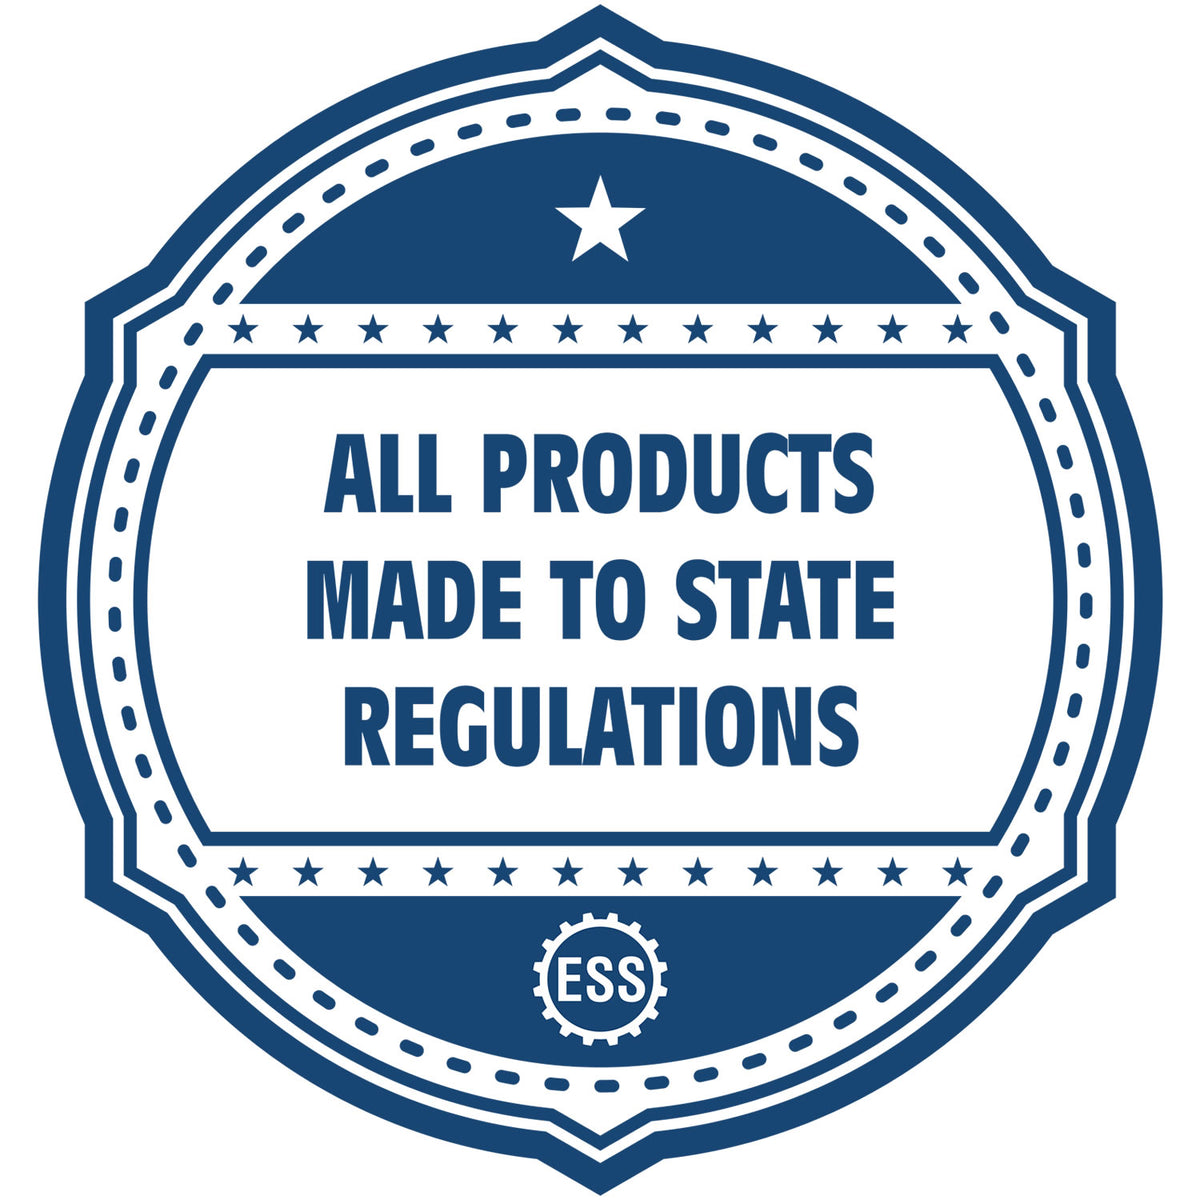 An icon or badge element for the Self-Inking State Seal Utah Notary Stamp showing that this product is made in compliance with state regulations.